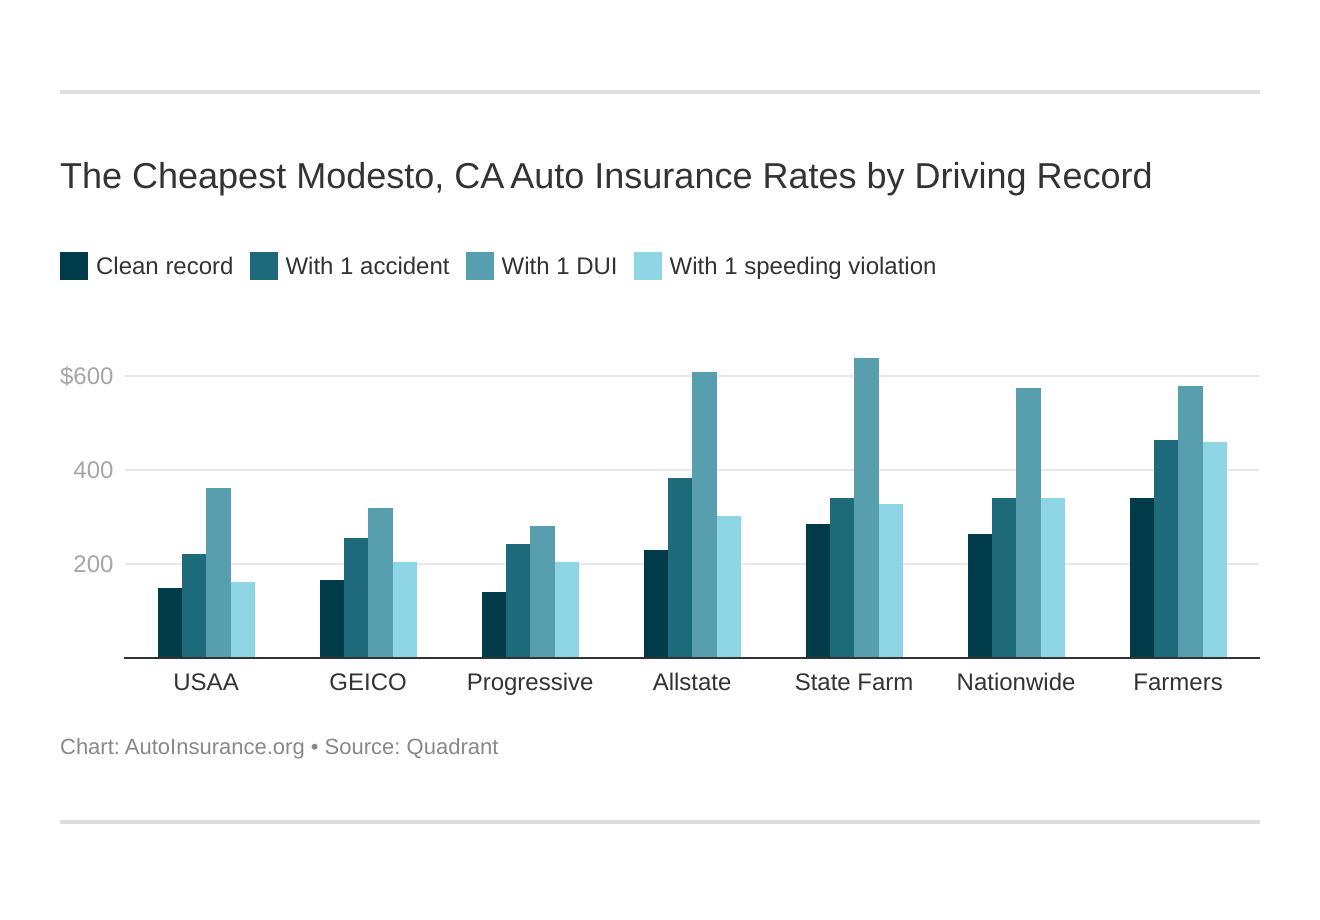 The Cheapest Modesto, CA Auto Insurance Rates by Driving Record